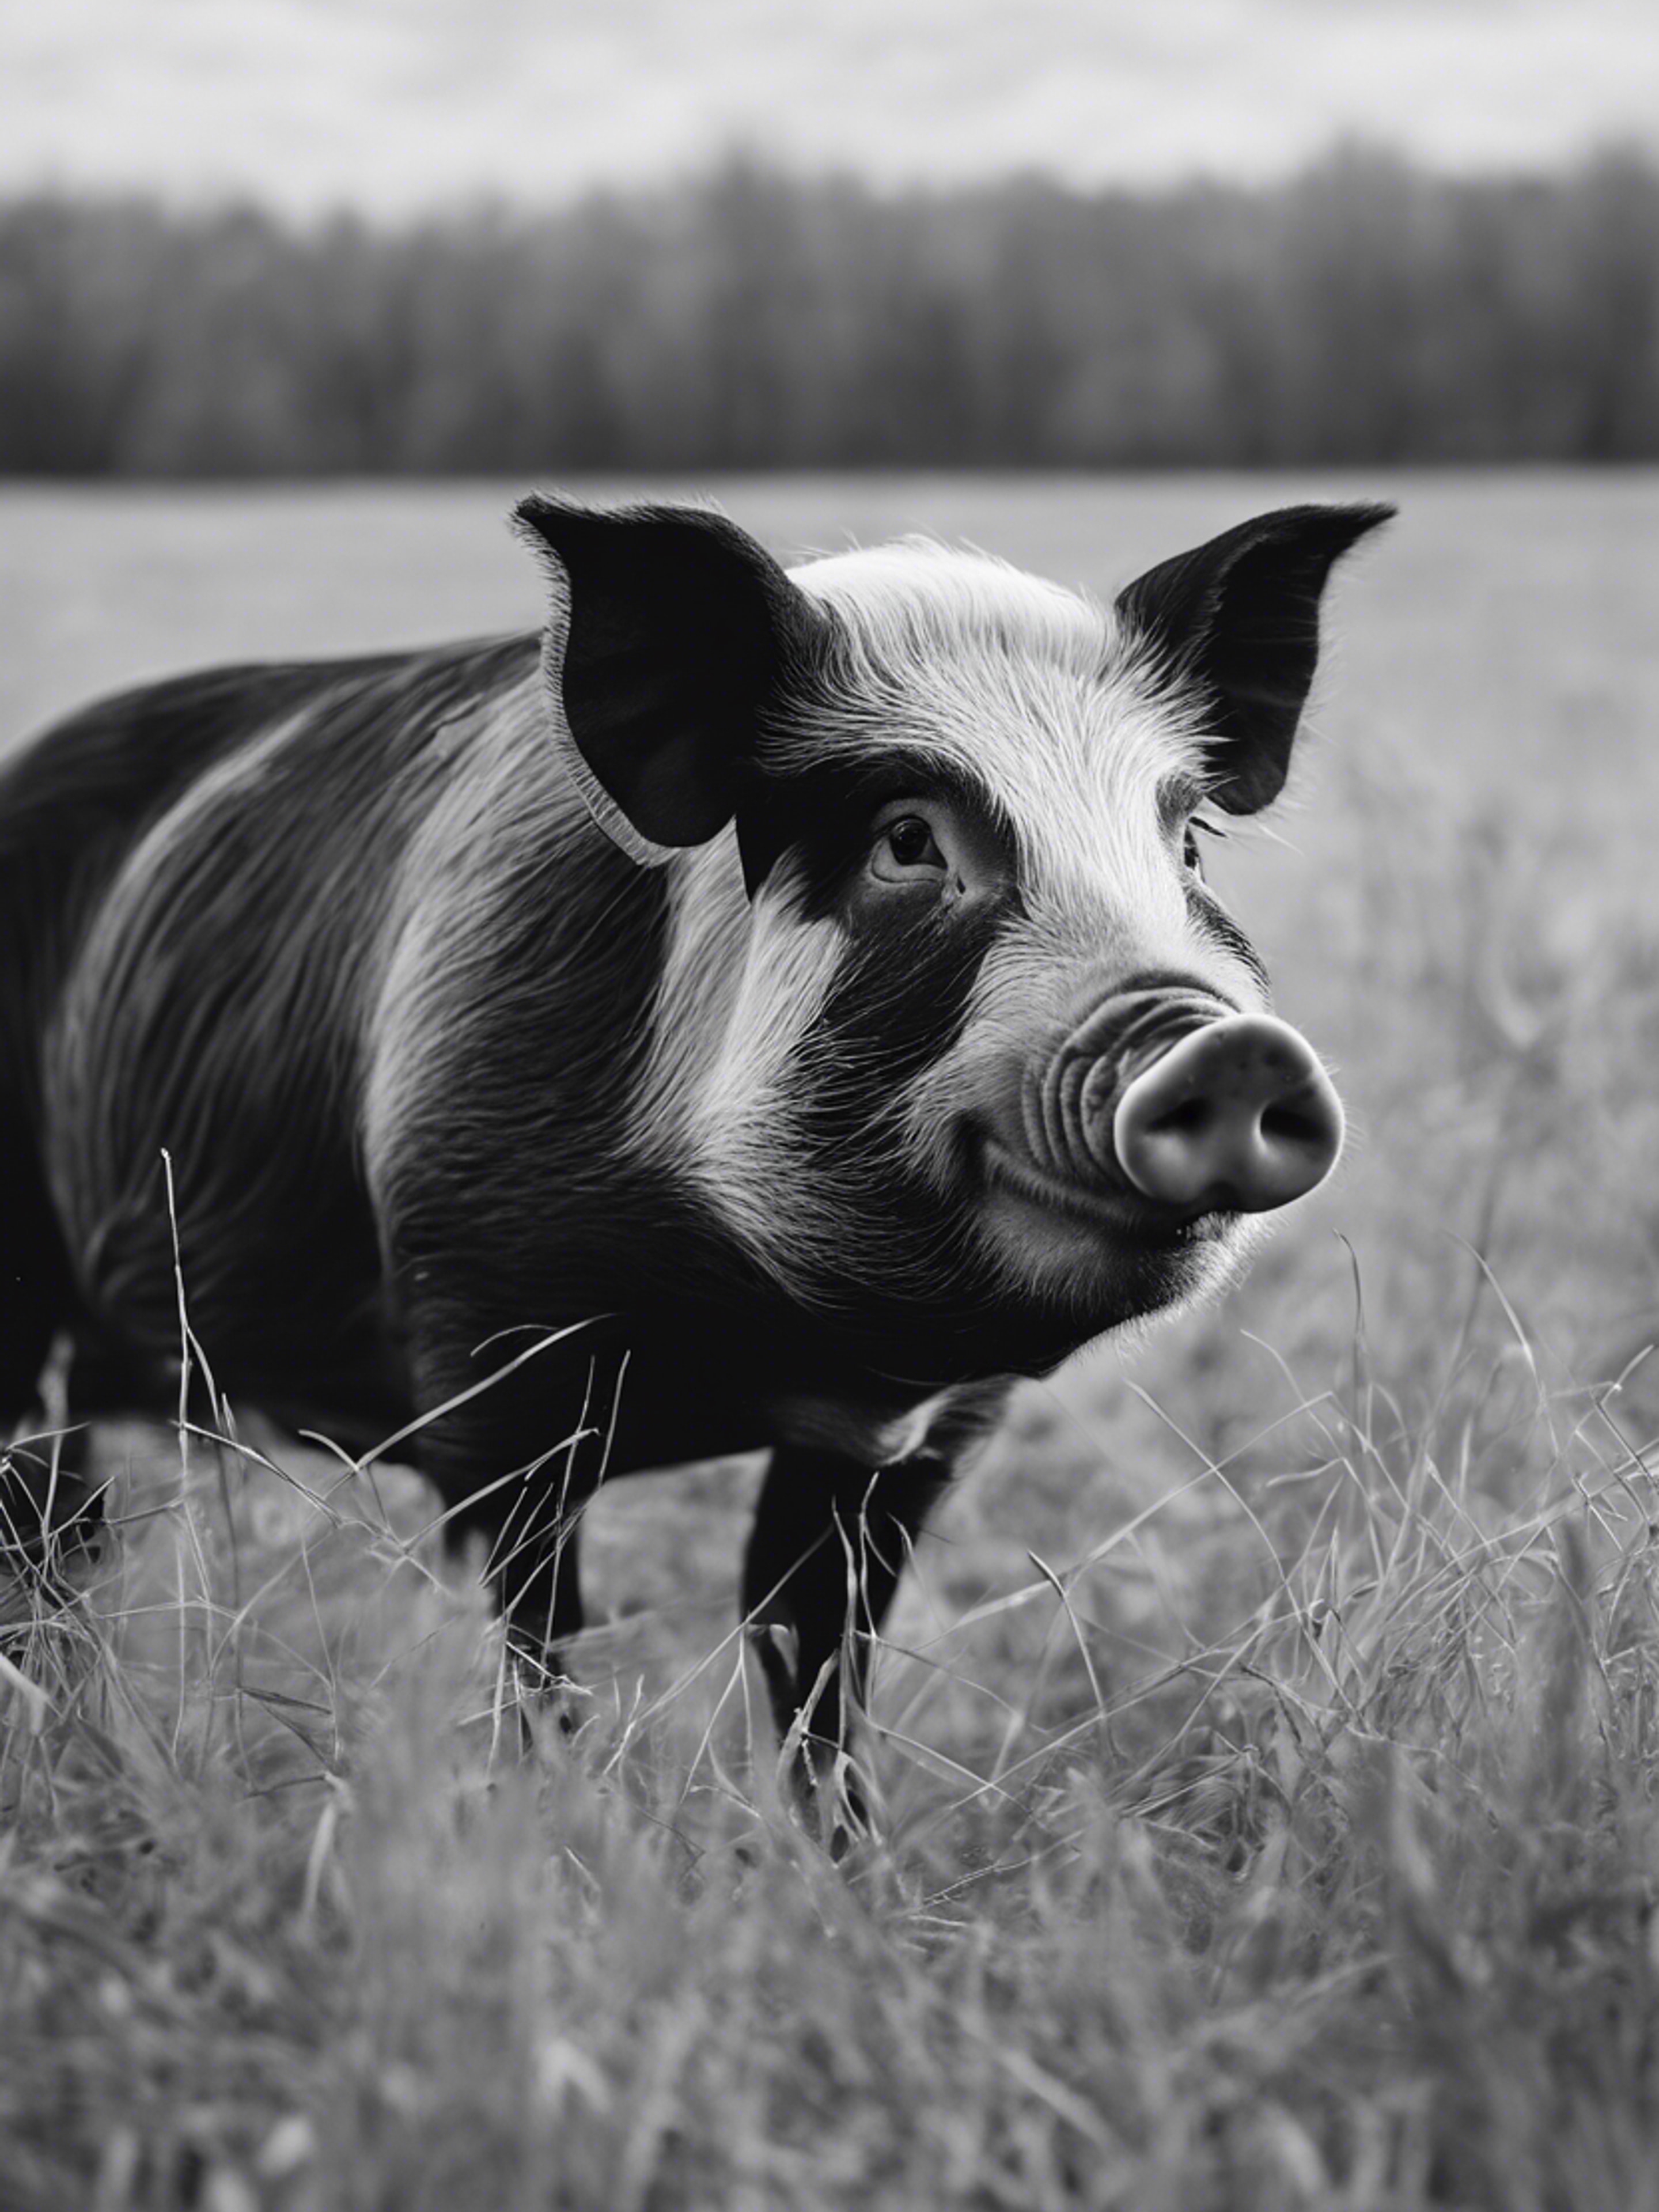 A black and white pig with clean fur, captured in a country meadow during tranquility of winter. טפט[700eb497dc0e43a8b530]